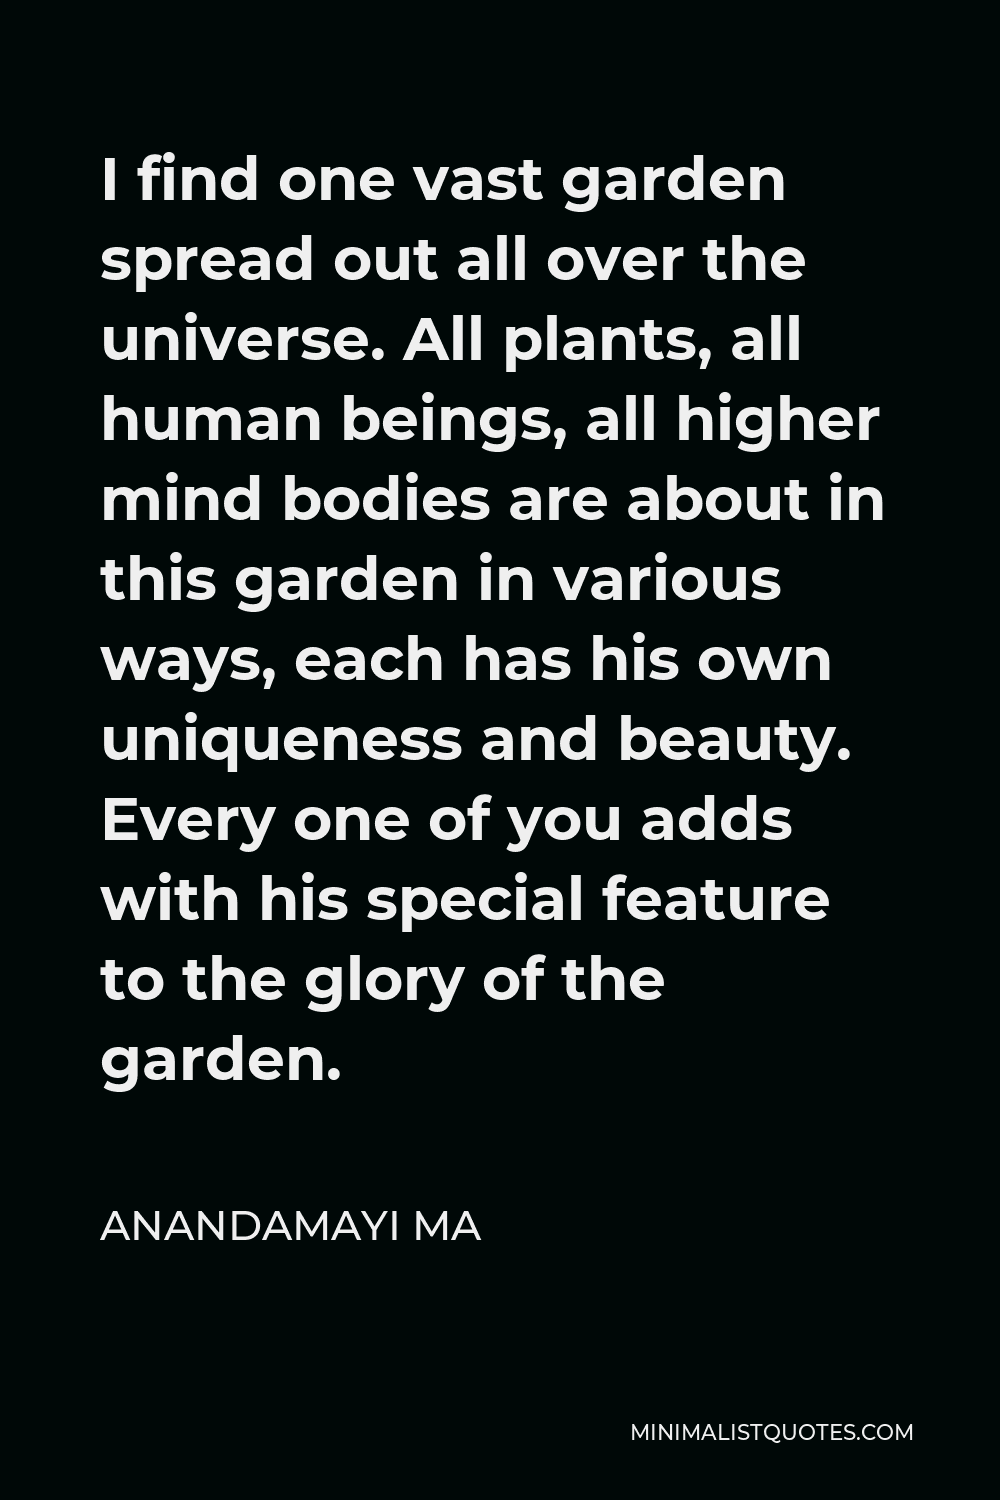 Anandamayi Ma Quote - I find one vast garden spread out all over the universe. All plants, all human beings, all higher mind bodies are about in this garden in various ways, each has his own uniqueness and beauty. Every one of you adds with his special feature to the glory of the garden.